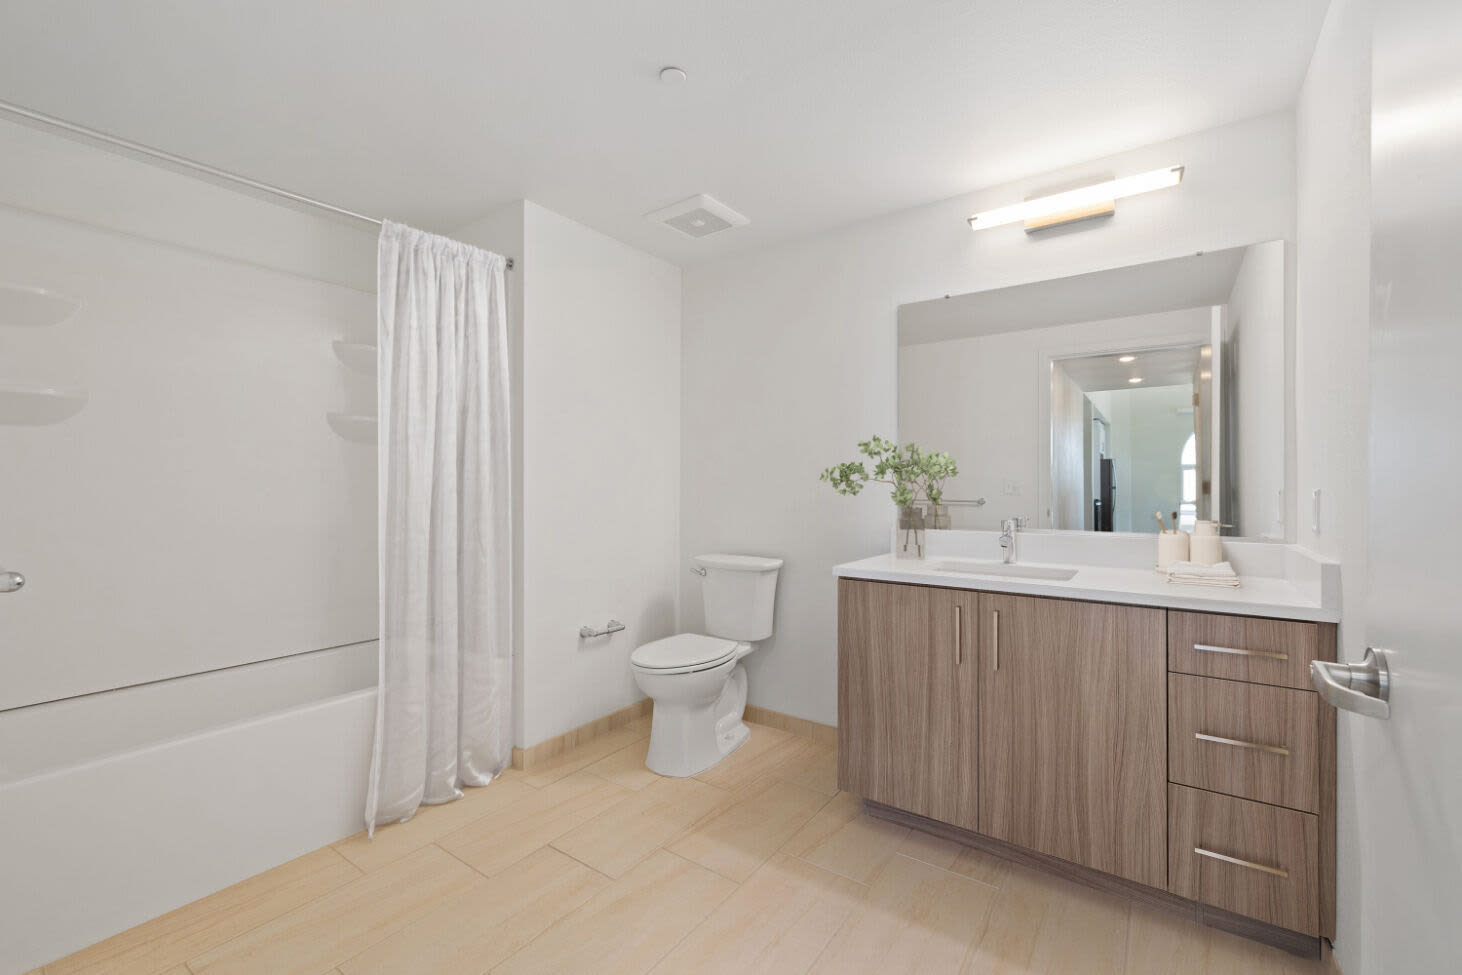 Modern finished in an apartment bathroom at Lincoln Landing in Hayward, California